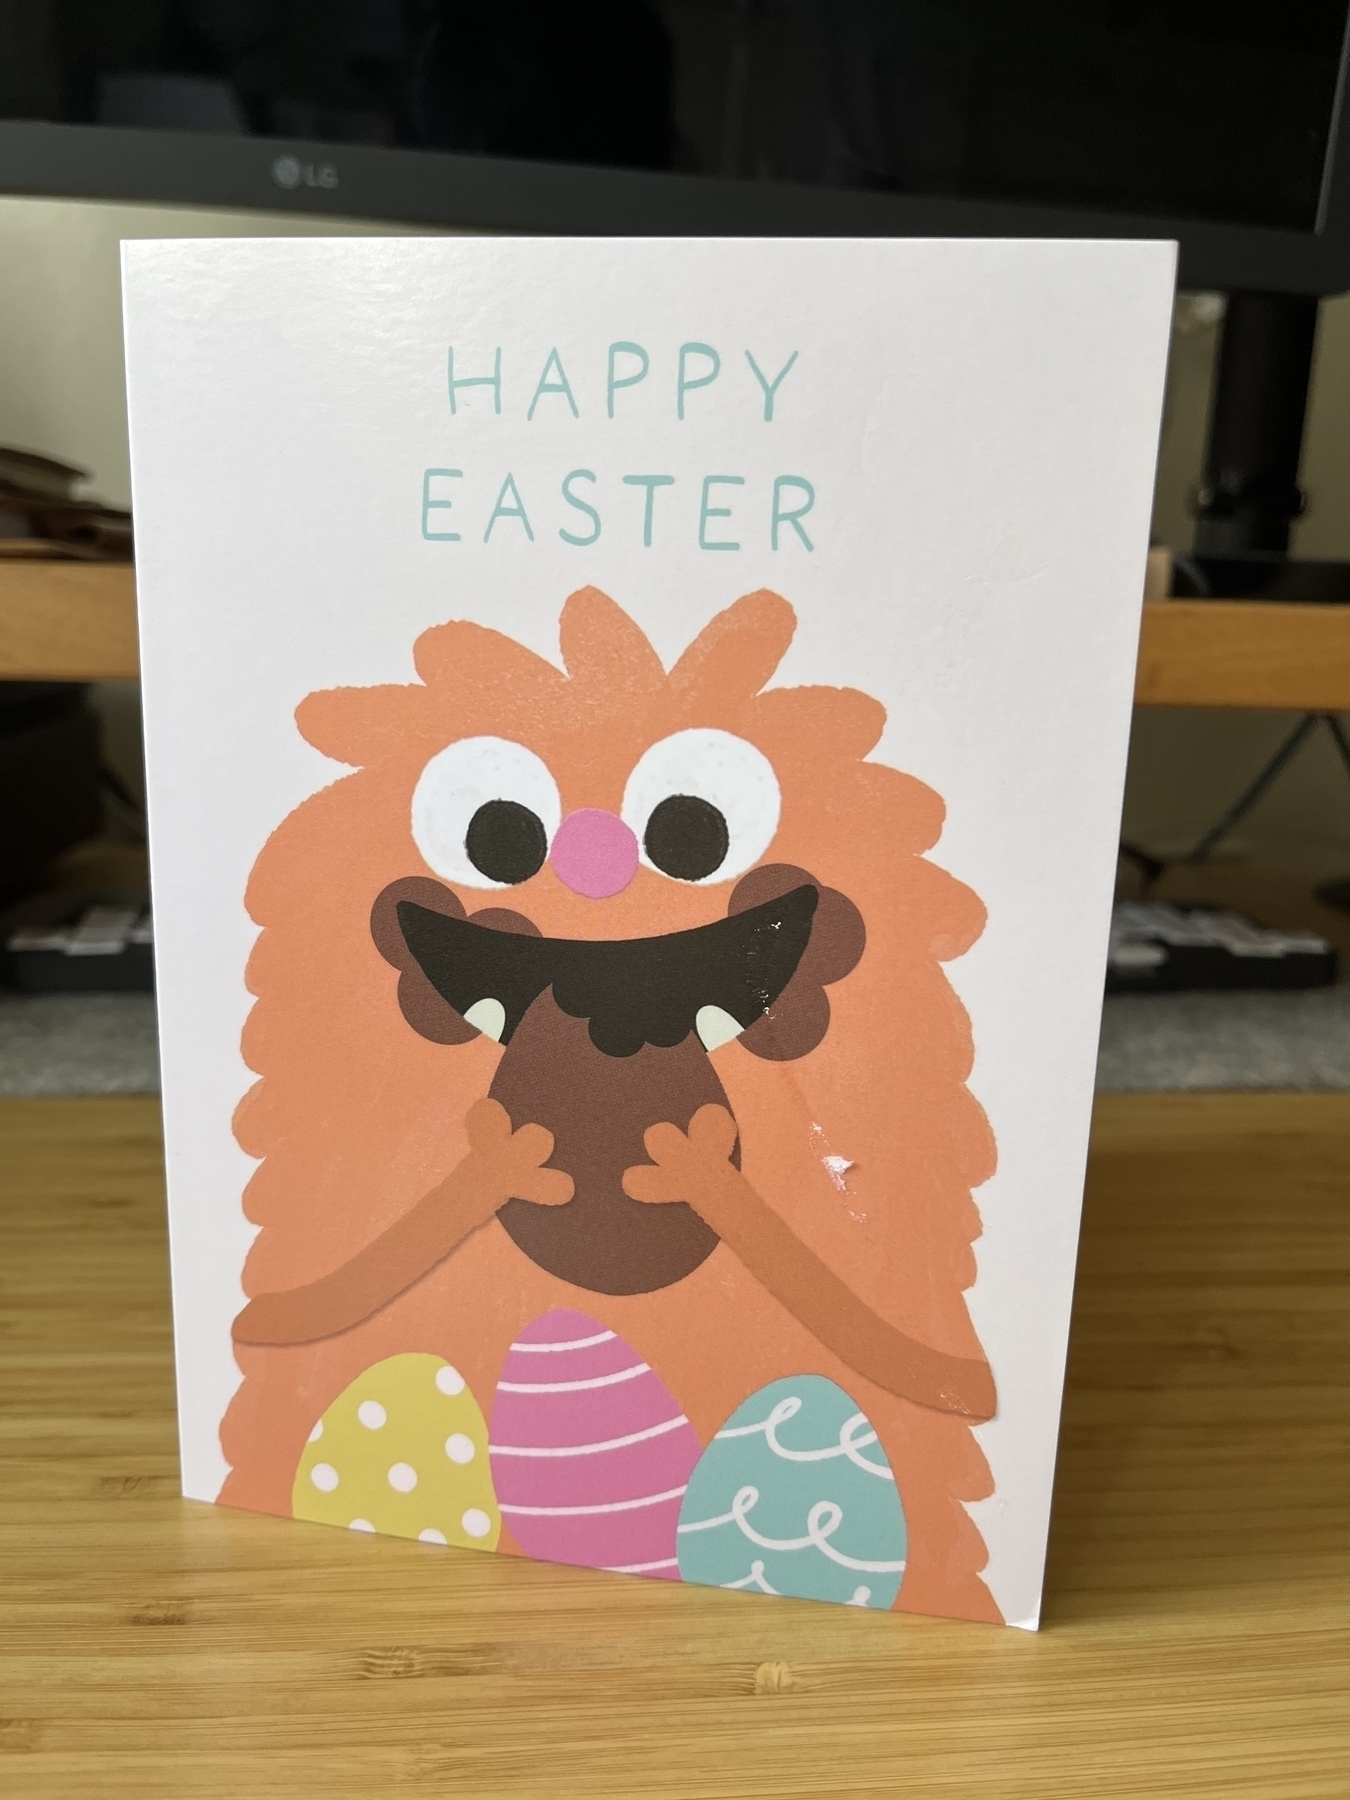 An Easter card with an illustration of a happy, hairy orange monster eating chocolate Easter eggs, with chocolate all around their mouth. 